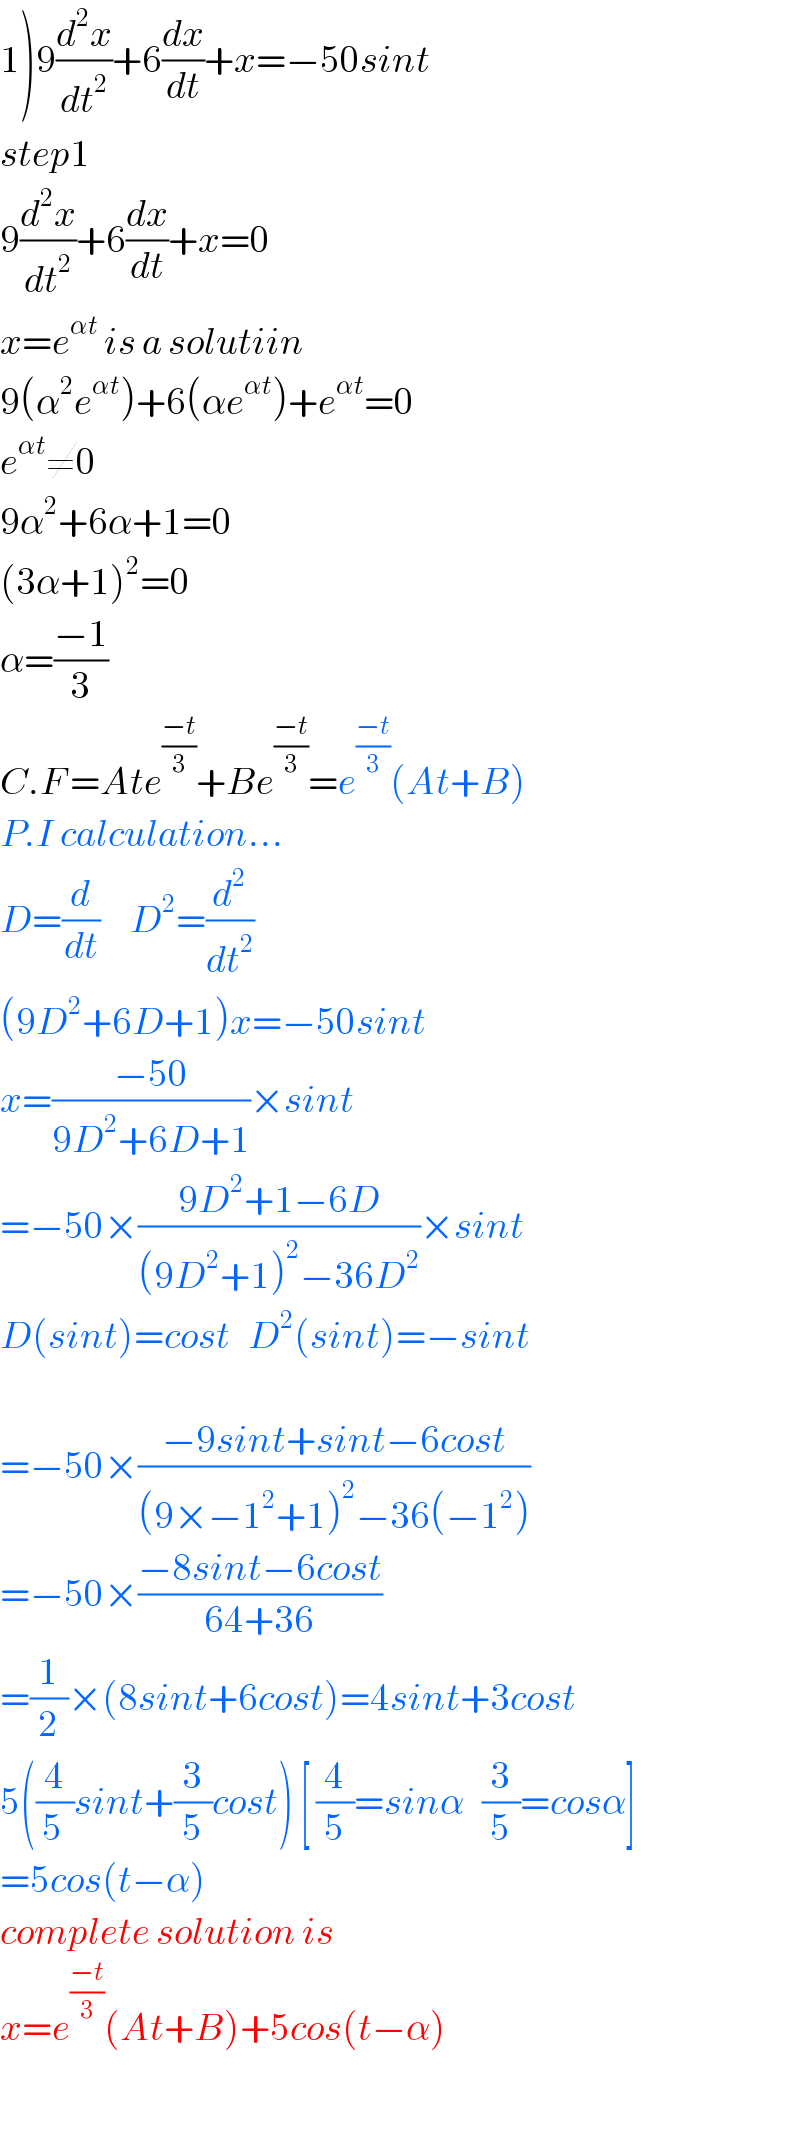 1)9(d^2 x/dt^2 )+6(dx/dt)+x=−50sint  step1  9(d^2 x/dt^2 )+6(dx/dt)+x=0  x=e^(αt)  is a solutiin  9(α^2 e^(αt) )+6(αe^(αt) )+e^(αt) =0  e^(αt) ≠0  9α^2 +6α+1=0  (3α+1)^2 =0  α=((−1)/3)  C.F =Ate^((−t)/3) +Be^((−t)/3) =e^((−t)/3) (At+B)  P.I calculation...  D=(d/dt)     D^2 =(d^2 /dt^2 )  (9D^2 +6D+1)x=−50sint  x=((−50)/(9D^2 +6D+1))×sint  =−50×((9D^2 +1−6D)/((9D^2 +1)^2 −36D^2 ))×sint  D(sint)=cost   D^2 (sint)=−sint    =−50×((−9sint+sint−6cost)/((9×−1^2 +1)^2 −36(−1^2 )))  =−50×((−8sint−6cost)/(64+36))  =(1/2)×(8sint+6cost)=4sint+3cost  5((4/(5 ))sint+(3/5)cost) [ (4/5)=sinα   (3/5)=cosα]  =5cos(t−α)  complete solution is  x=e^((−t)/3) (At+B)+5cos(t−α)    